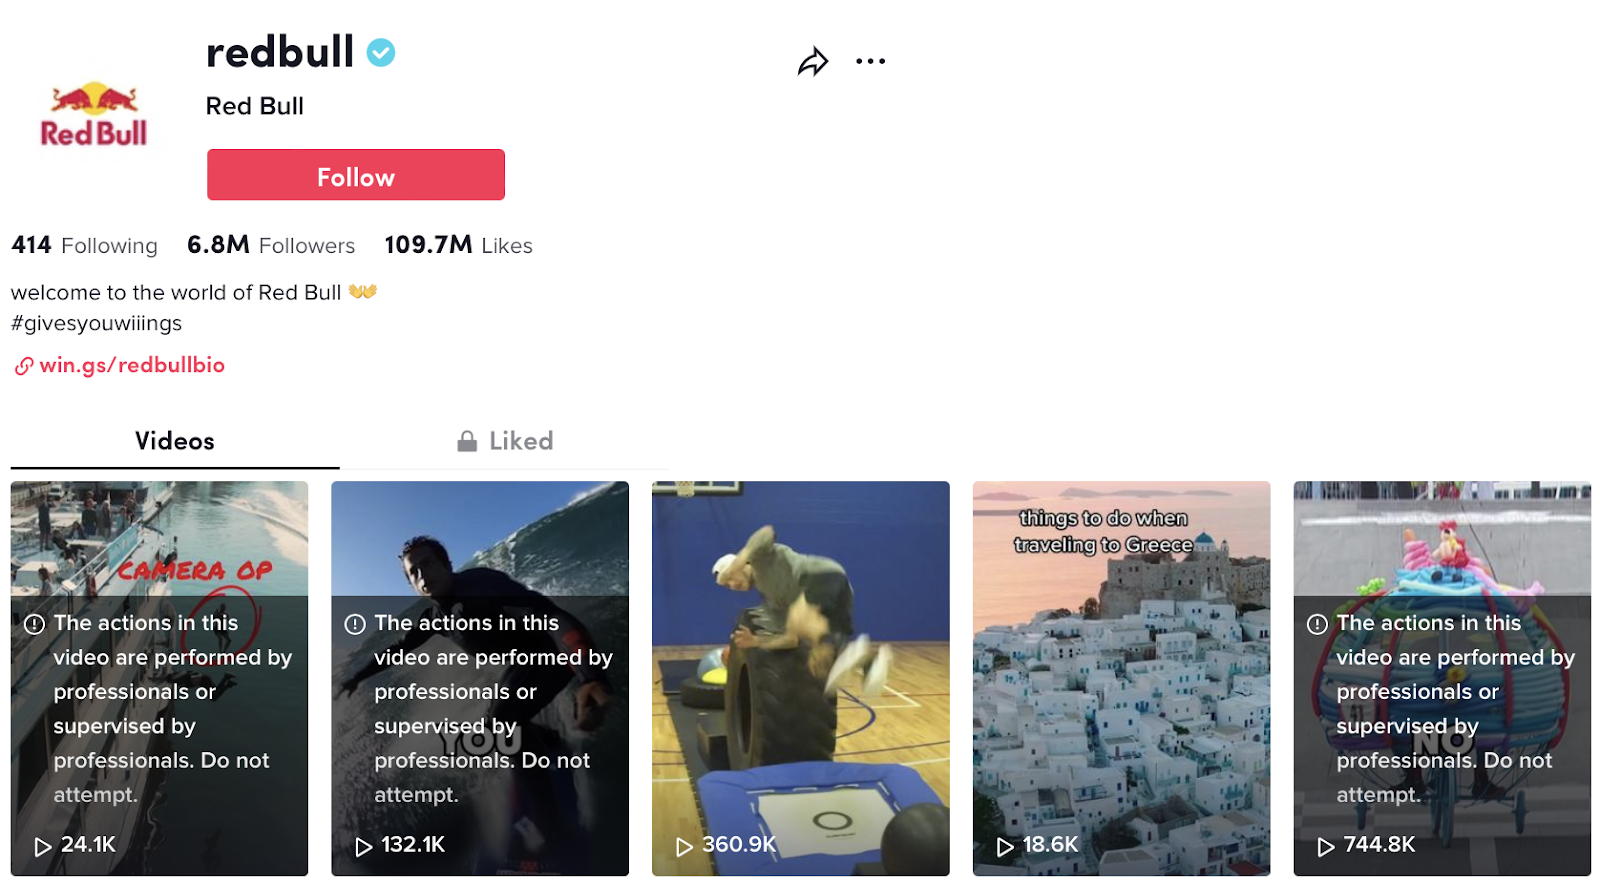 This is an example of how Red Bull leverages TikTok influencer marketing